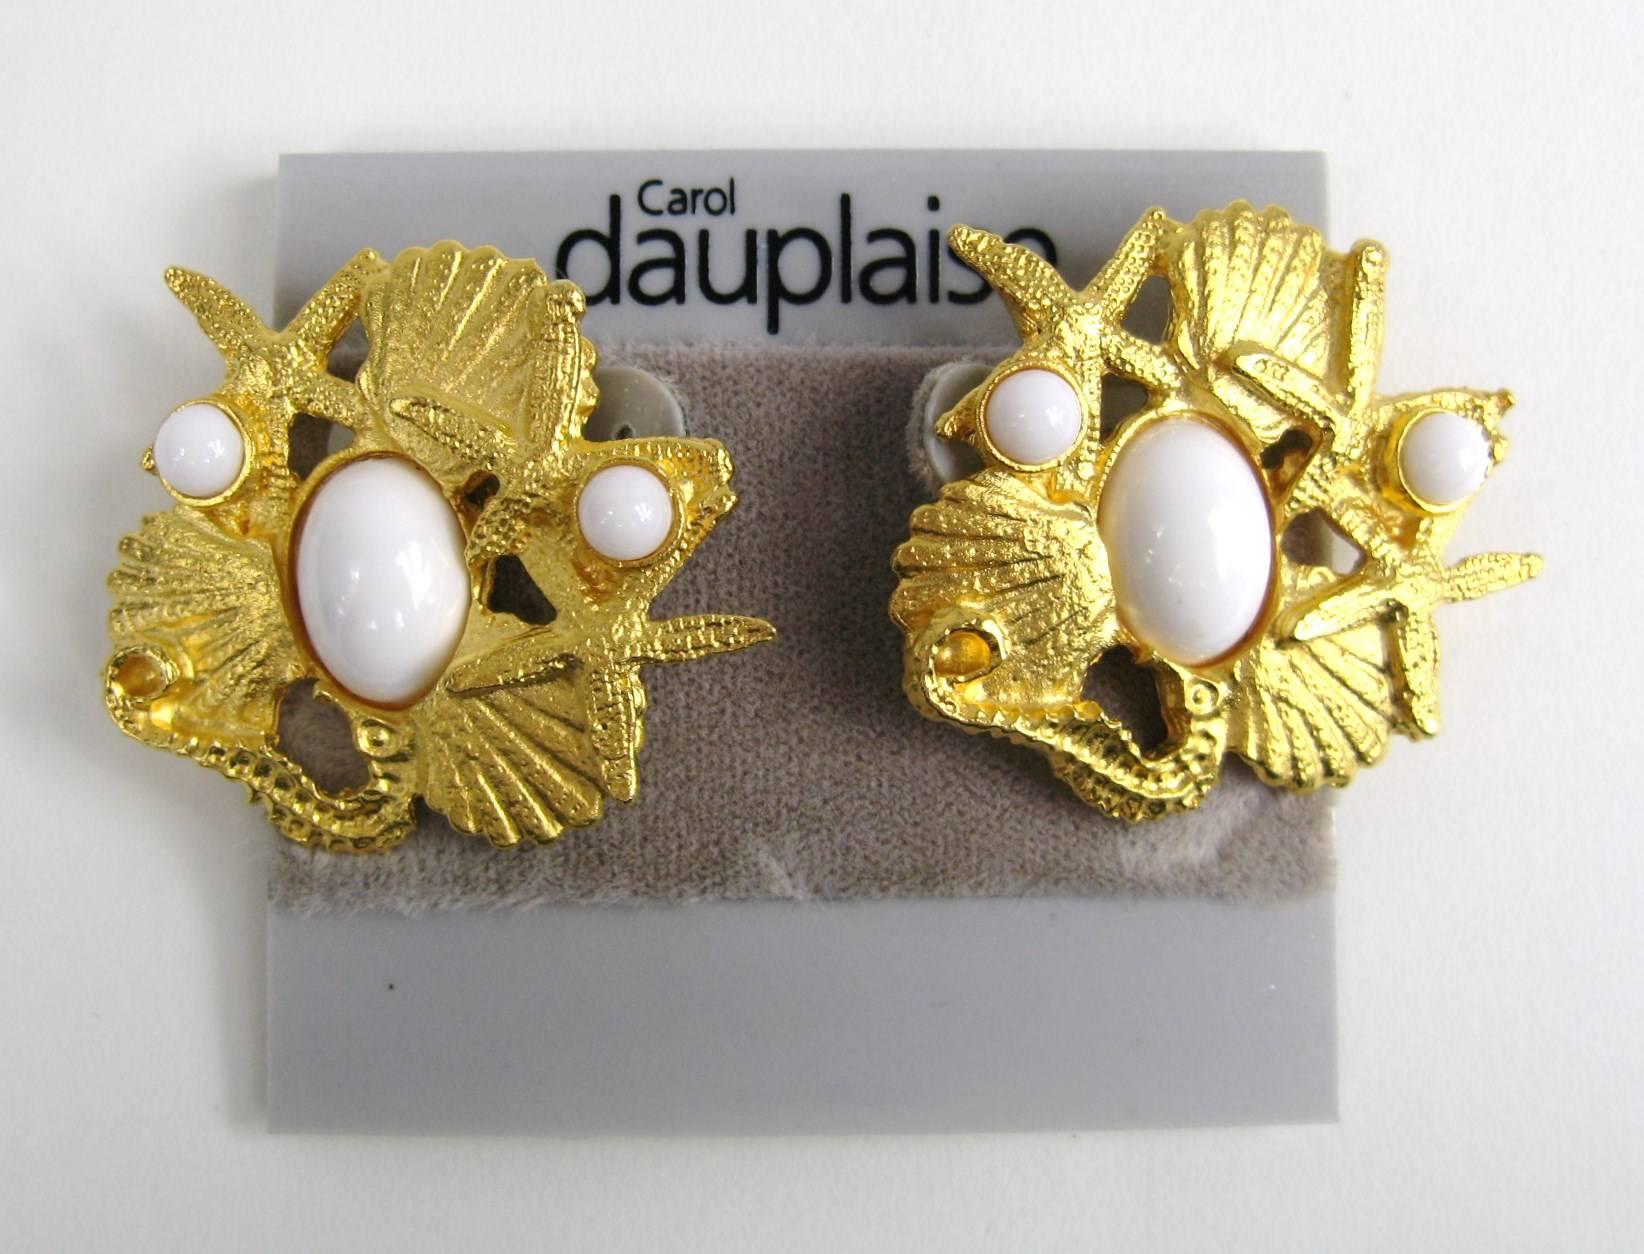 Carol Dauplaise is a former employee of Miriam Haskell. Company founded in 1979. This set is New Old stock, never worn with a Sea Shell Motif. Earrings on clip on's. Measuring 1.38 in.  top to bottom x 1.5 in. wide. This is out of a massive